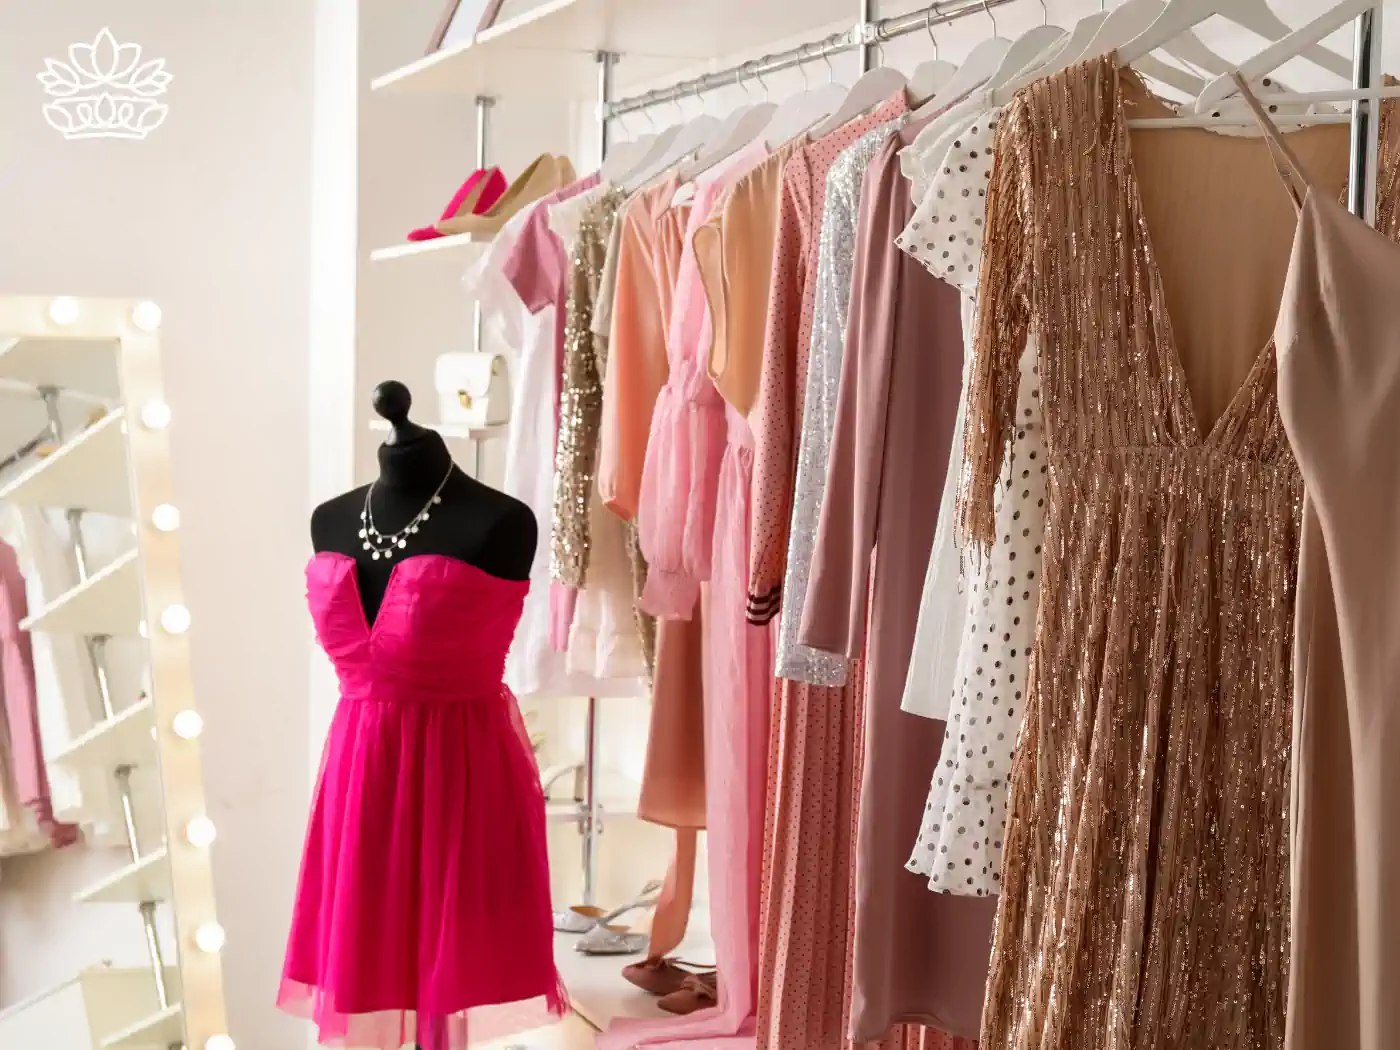 Elegant boutique interior displaying a variety of formal dresses in shades of pink, beige, and gold, elegantly arranged on hangers and a mannequin adorned with a vibrant pink dress and necklace, creating a chic and inviting shopping atmosphere for matric dance attire. Fabulous Flowers and Gifts - Matric Dance. Delivered with Heart.